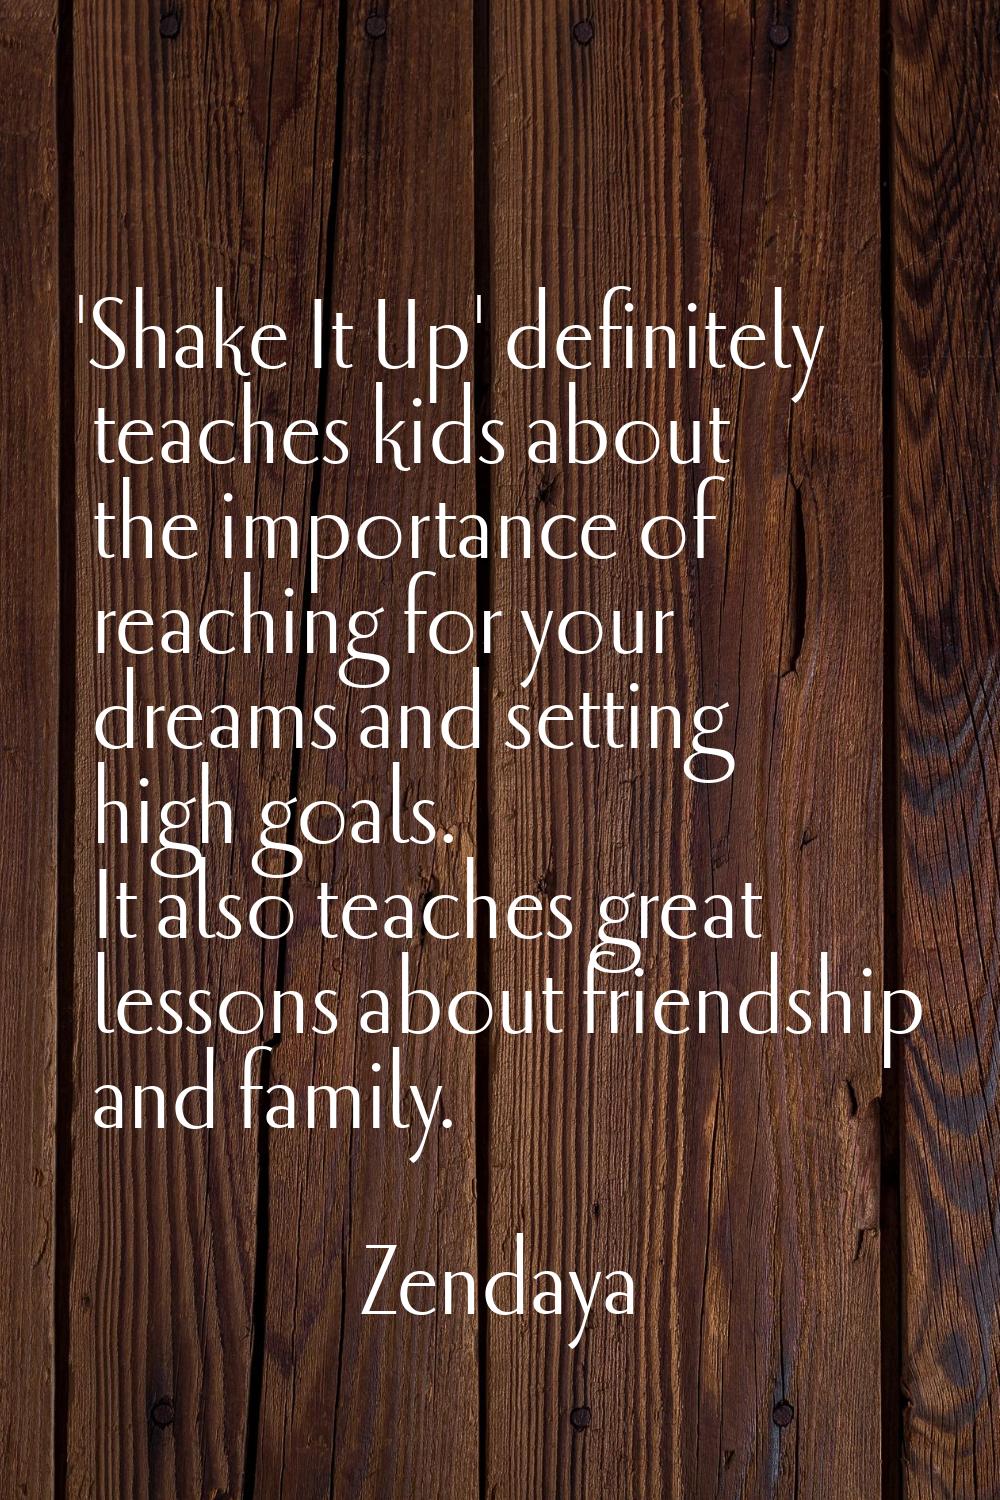 'Shake It Up' definitely teaches kids about the importance of reaching for your dreams and setting 